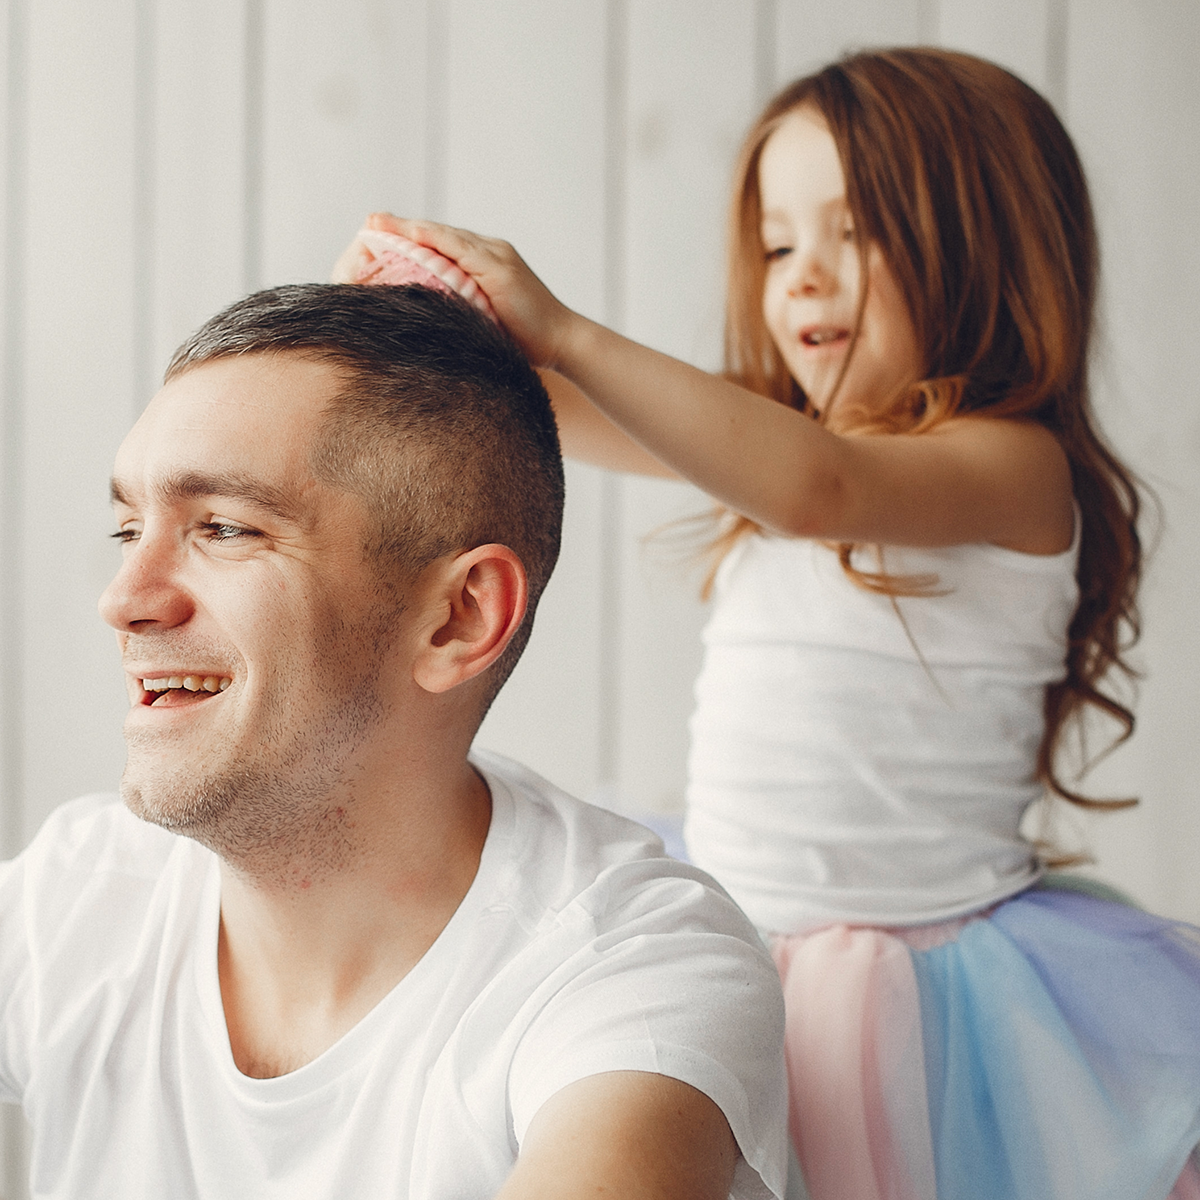 A little girl is putting a ponytail on a man 's head.